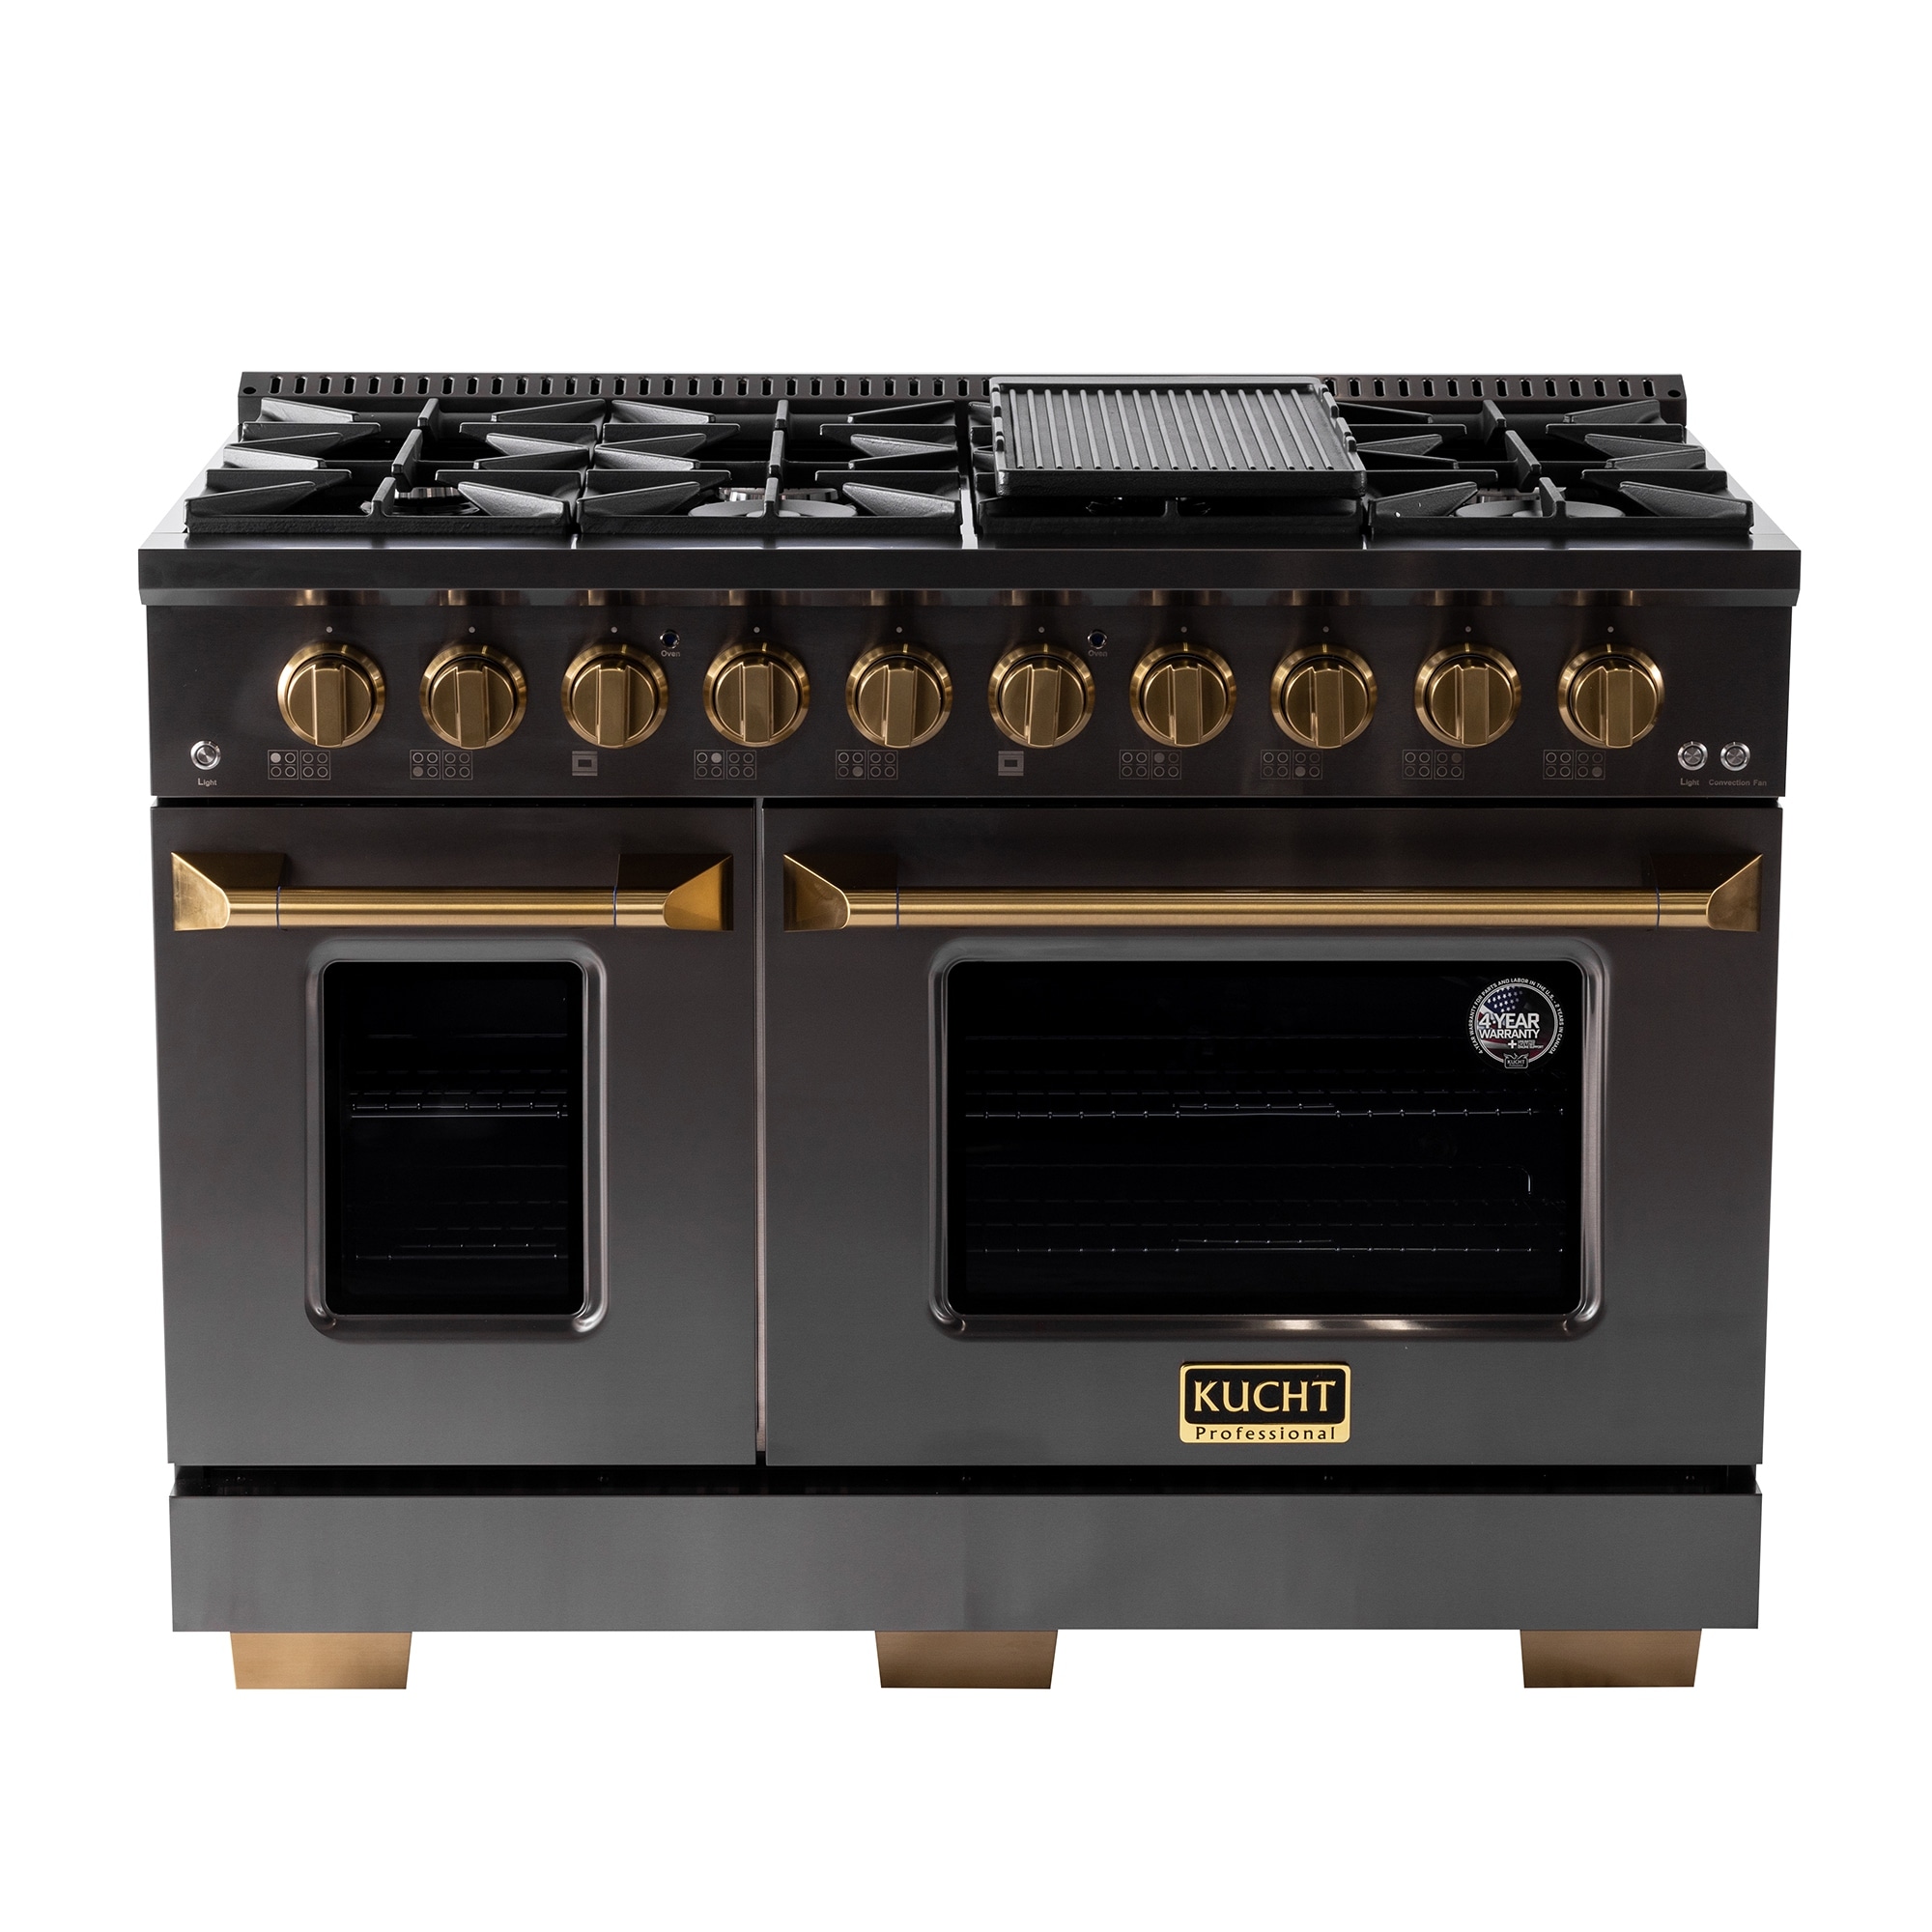 KUCHT Gemstone 48 in. 6.7 cu. ft. Natural Gas Range with Sealed Burners, Griddle/Grill and Two Ovens in Titanium Stainless Steel